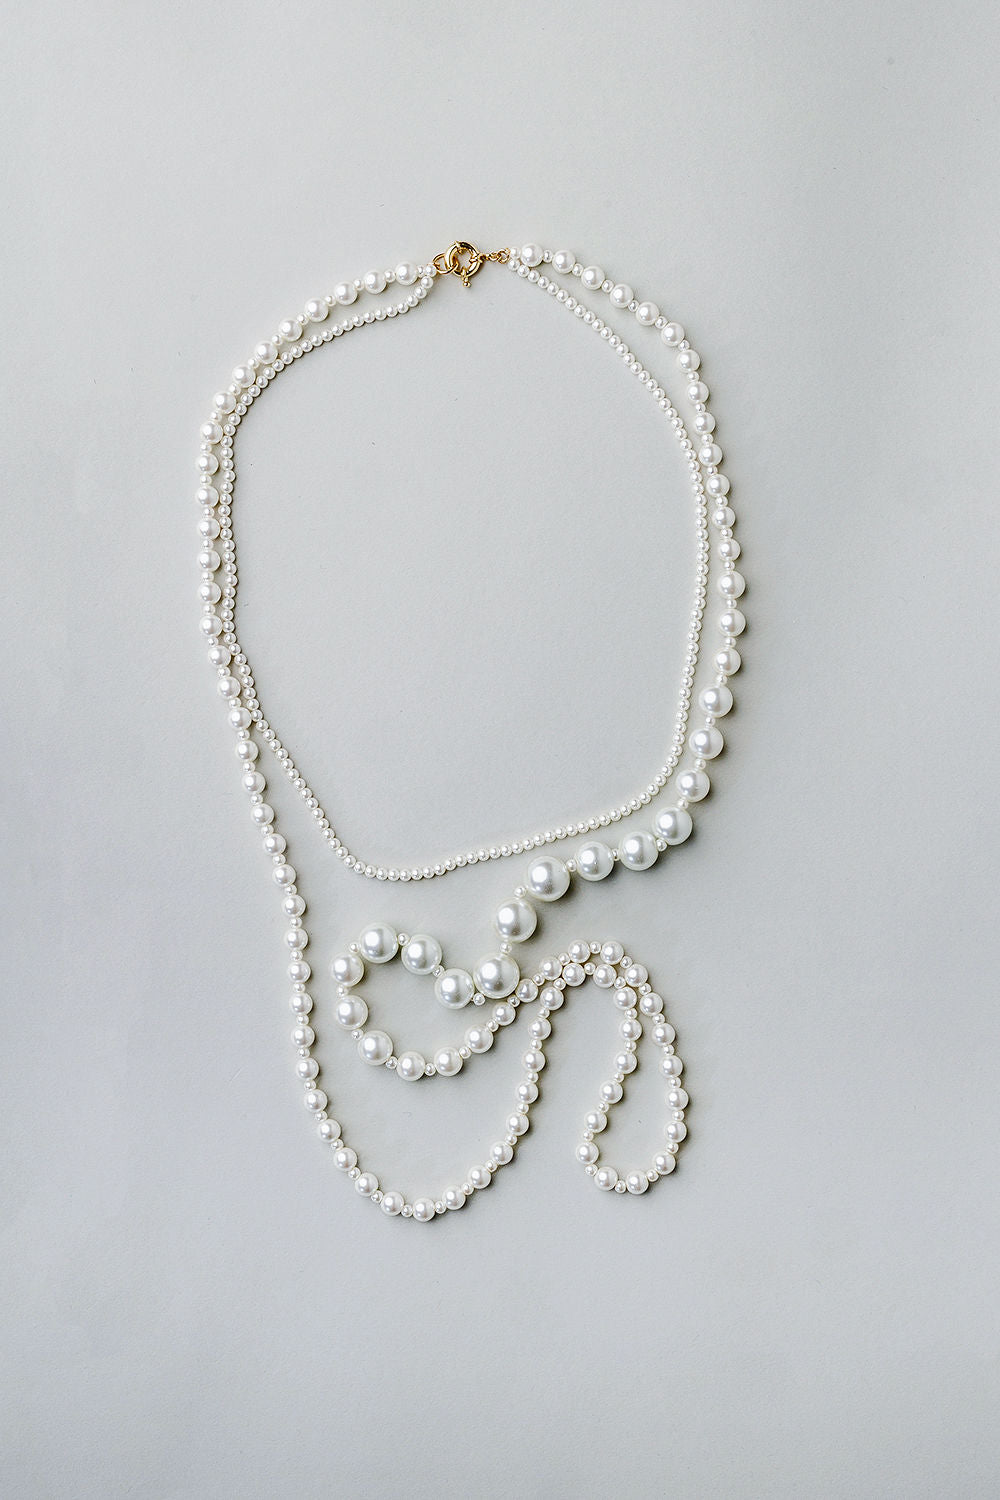 Bow 19 Pearl Necklace Long 2 Row